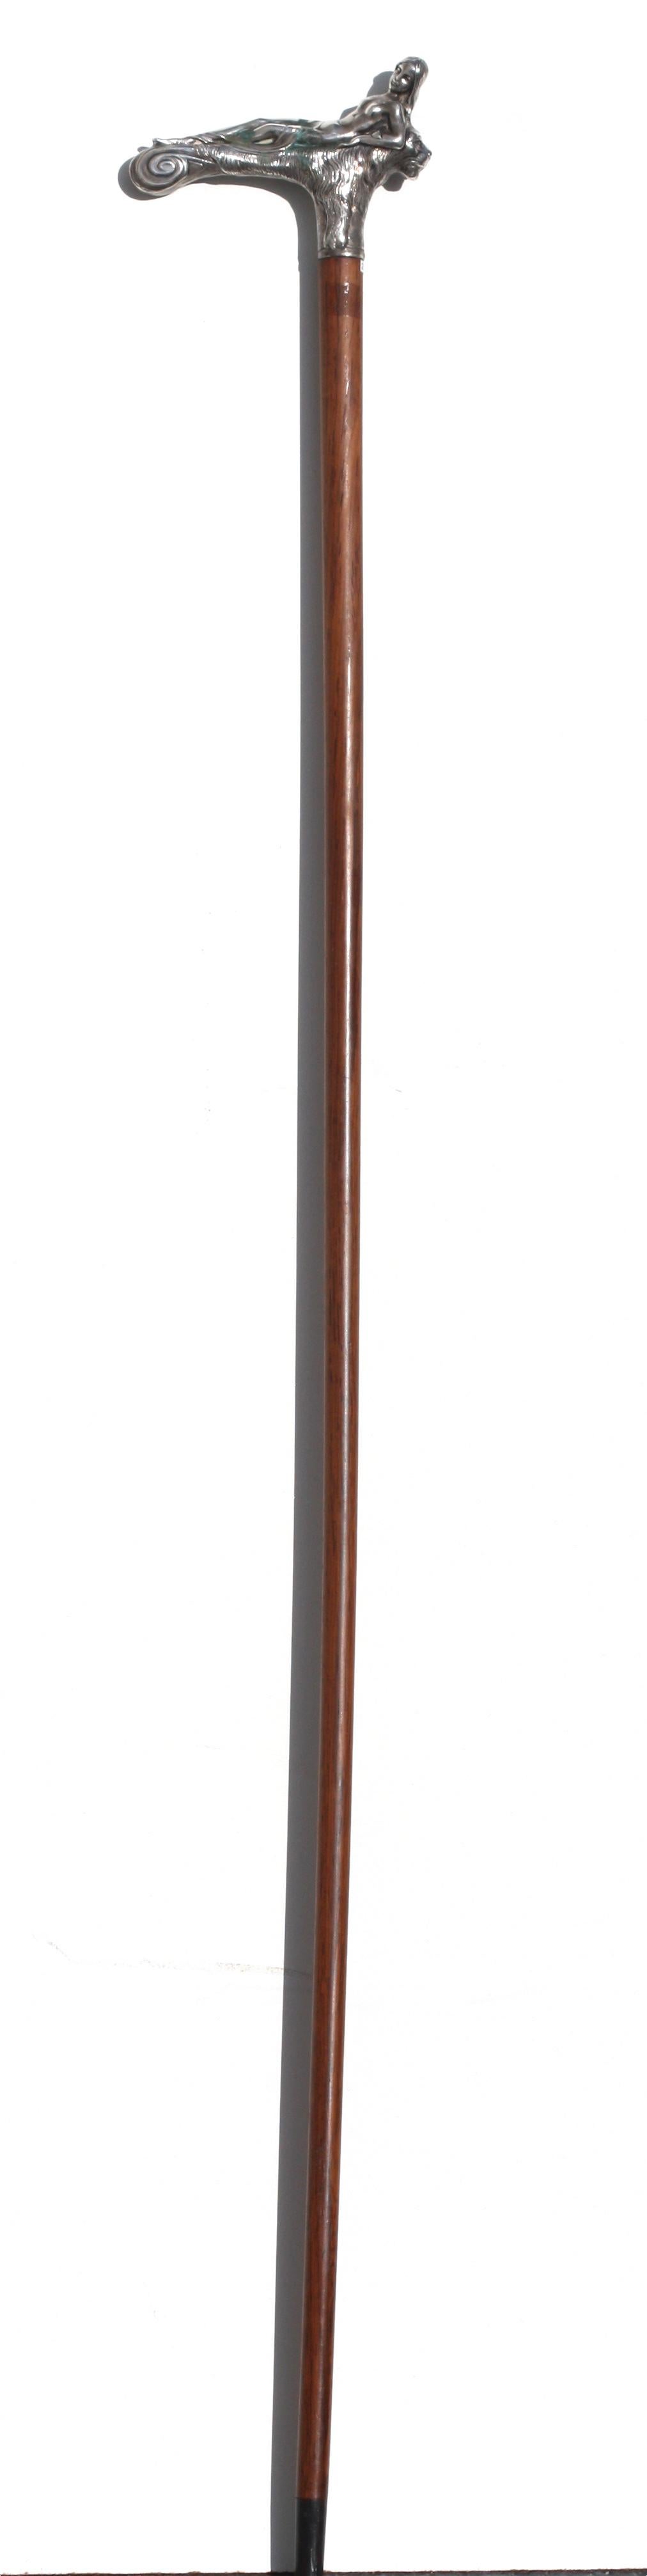 
Continental Silver Mounted Rosewood Gentlemens Walking Stick.
Late 19th Century, German or French. Appears unmarked. The handle cast as a lion surmounted by a recumbent scantily clad maiden, the rosewood shaft with a horn ferule. Length 36.25 in.